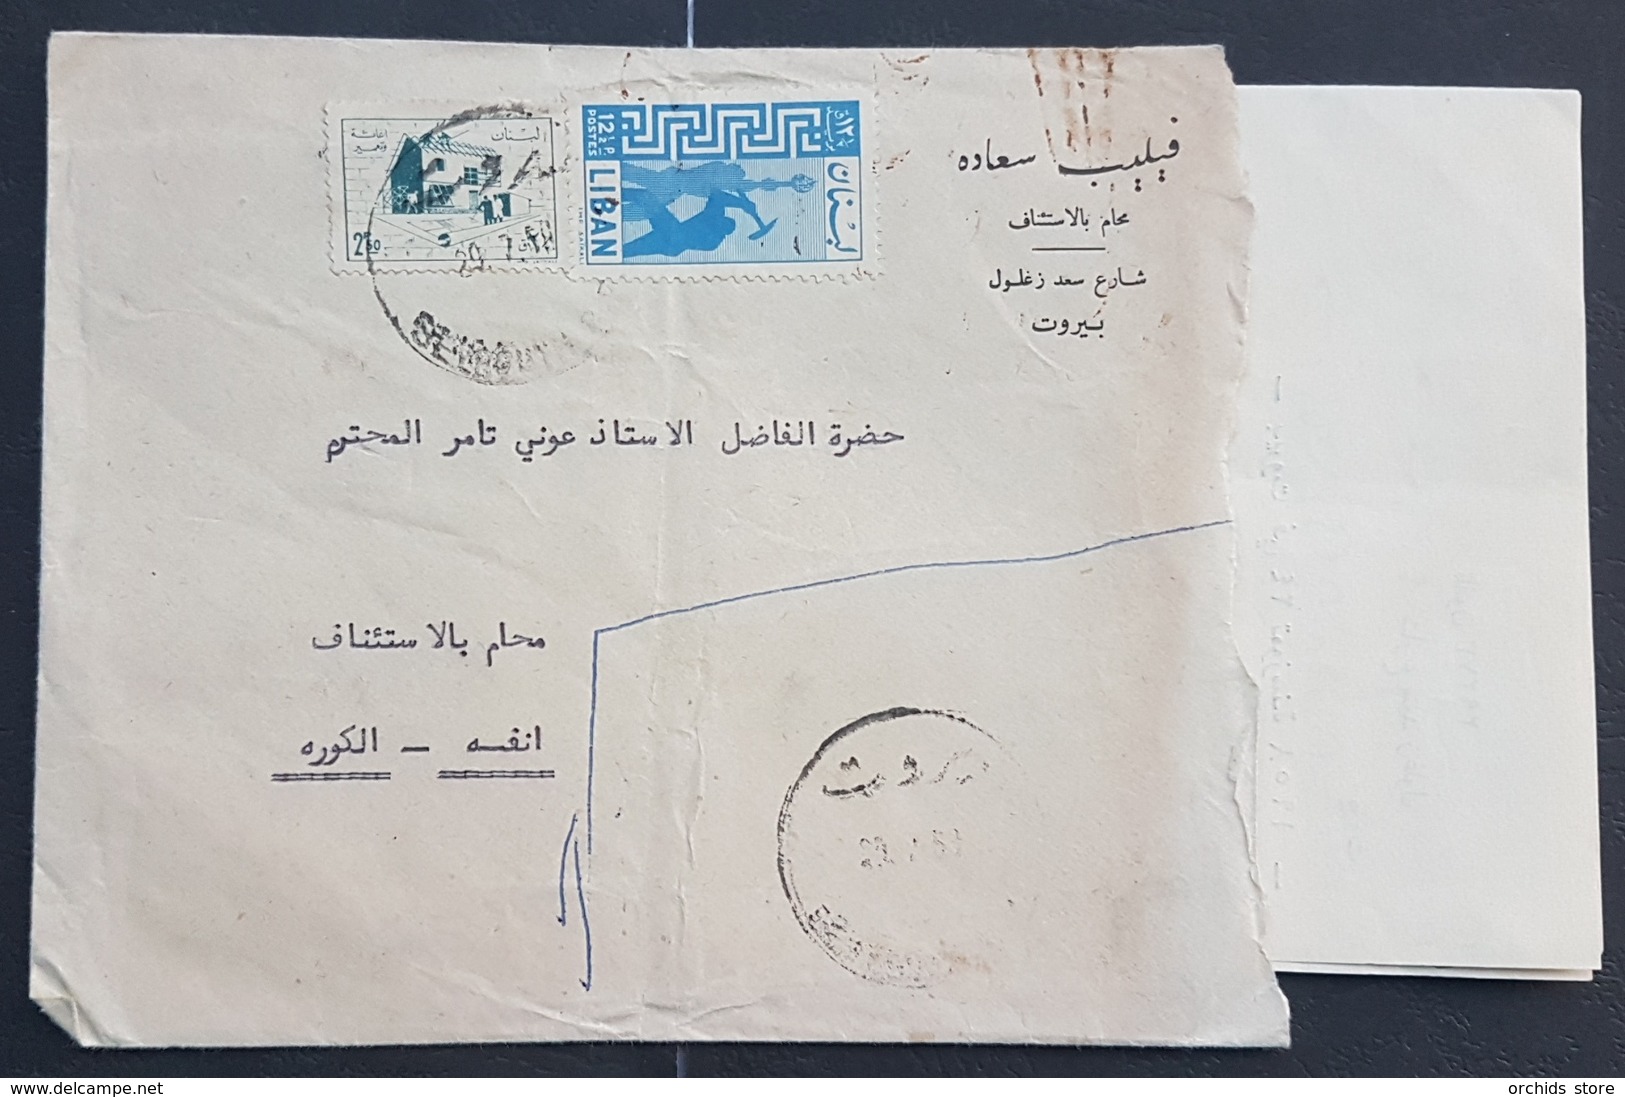 GE - Lebanon 1958 Nice Cover From Philippe Saade Franked BlueWork Stamp 12p50 And Earthquake Tax 2p.50 Sent To ENFE - Lebanon